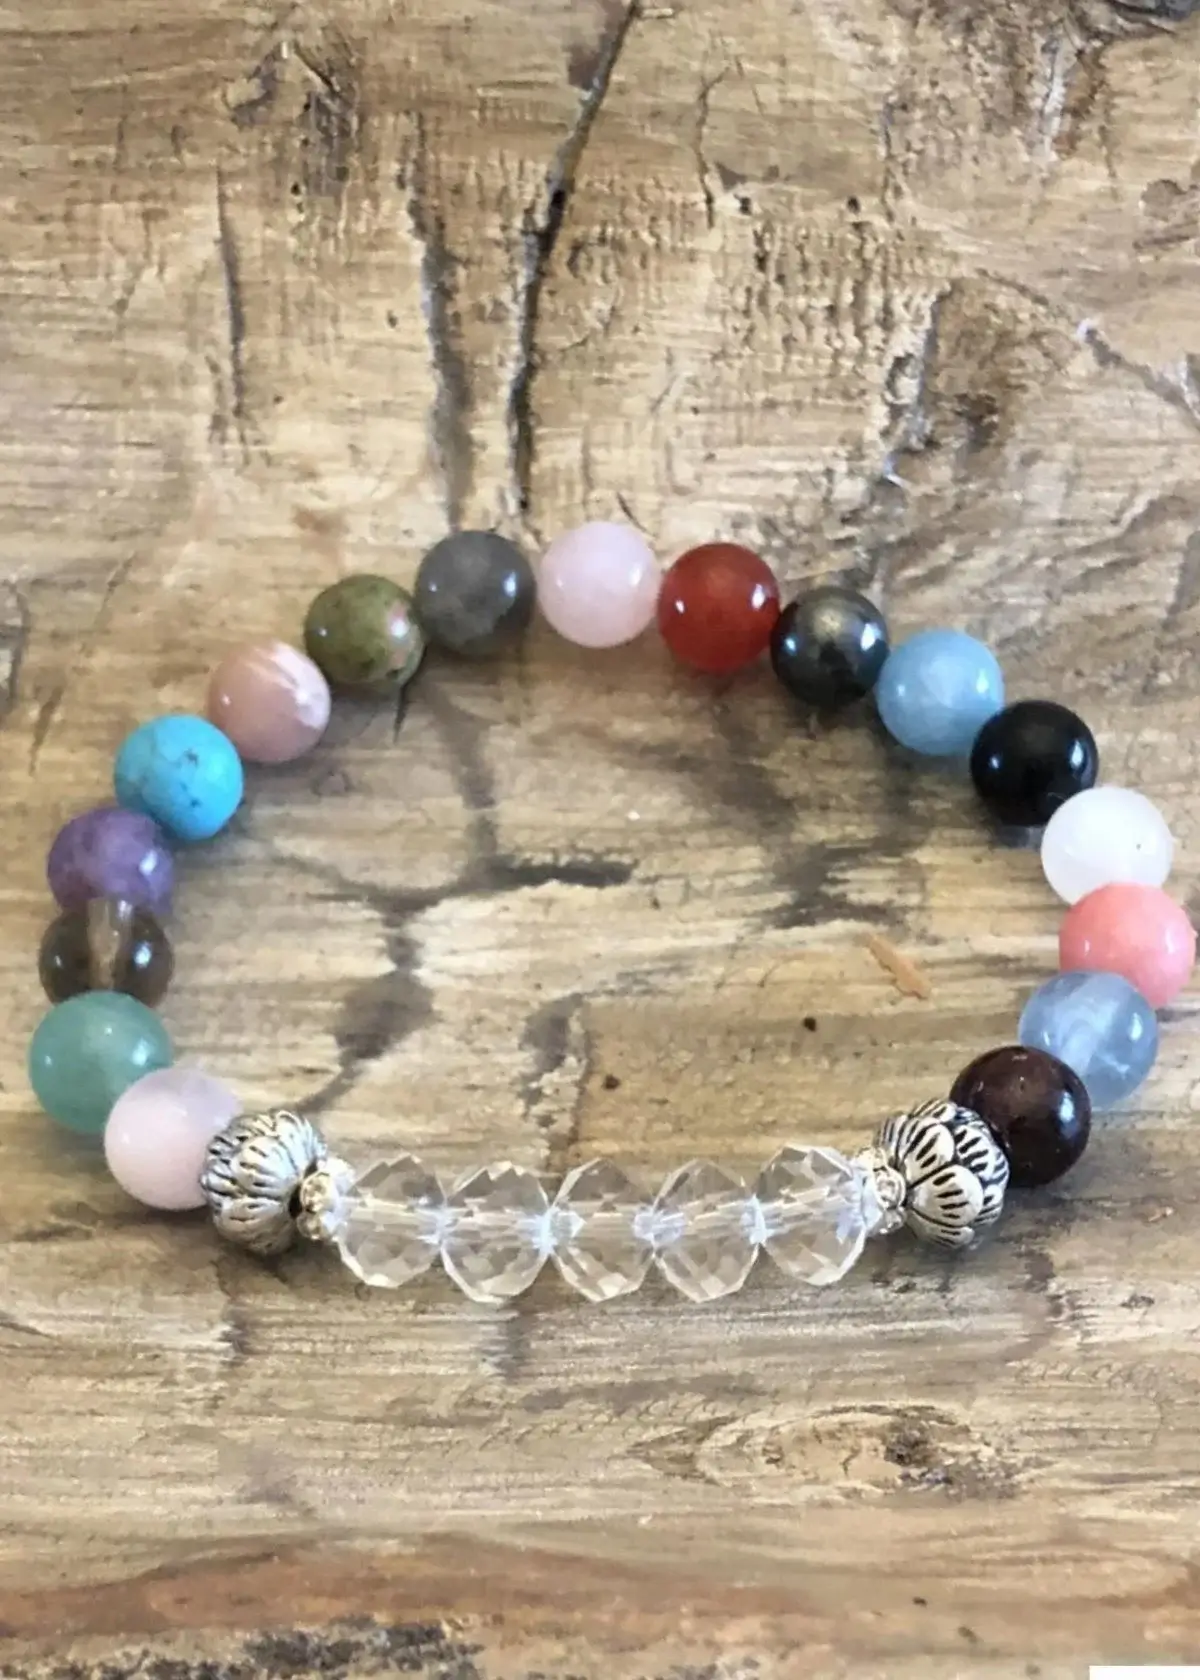 What are the common materials used in making fertility bracelets?